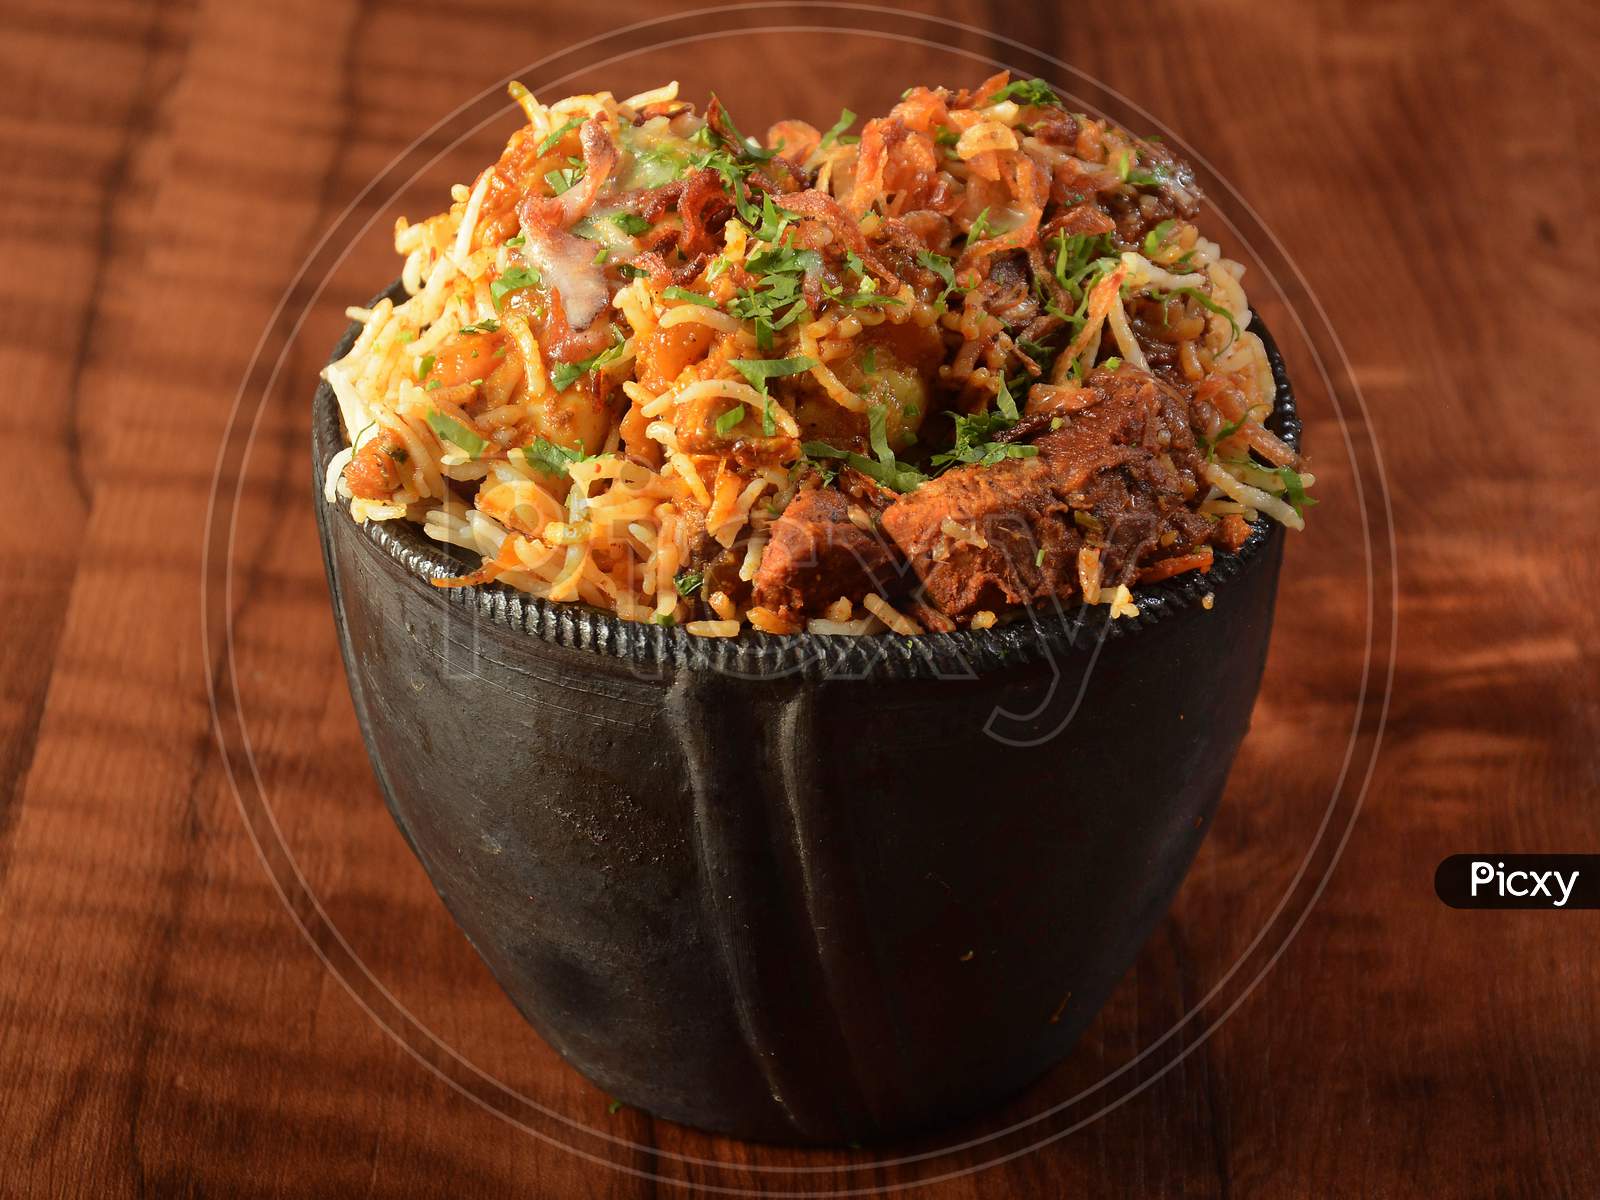 Traditional Hyderabadi Mutton Dum Biryani For Ramadan Kareem, Basmati Rice Cooked With Traditional Spices And Meat Served In Traditional Clay Pot